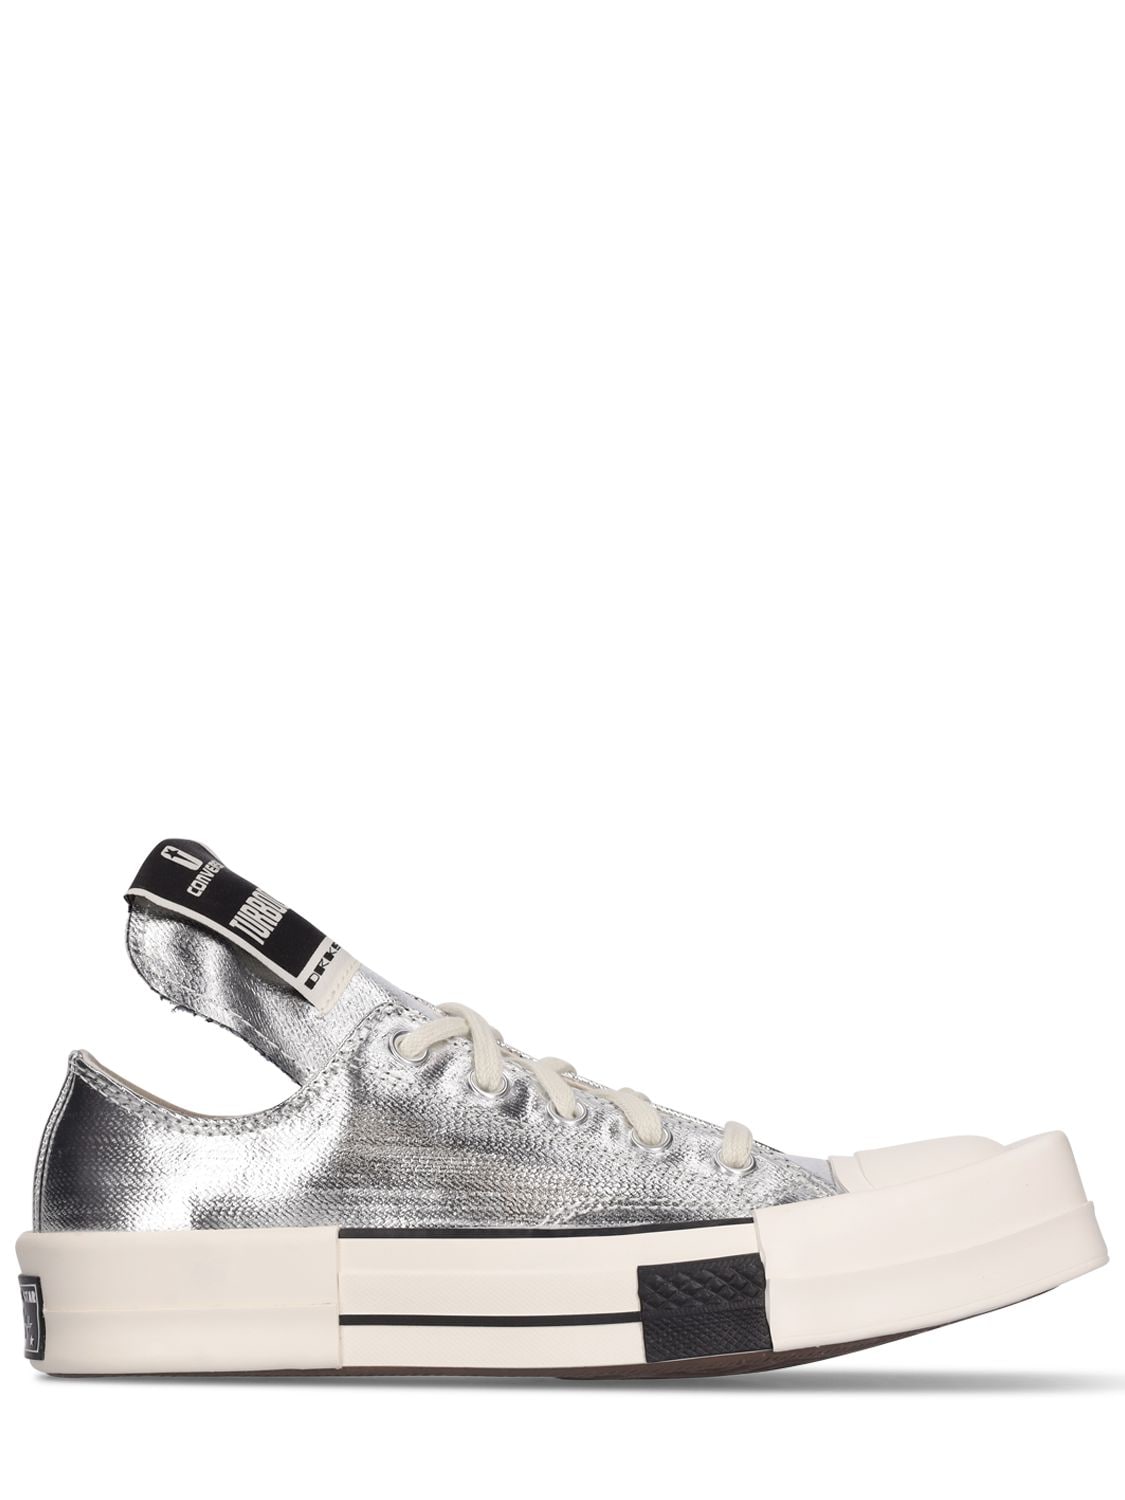 Drkshdw X Converse Converse Turbodrk Twill Low Sneakers In Silver,white